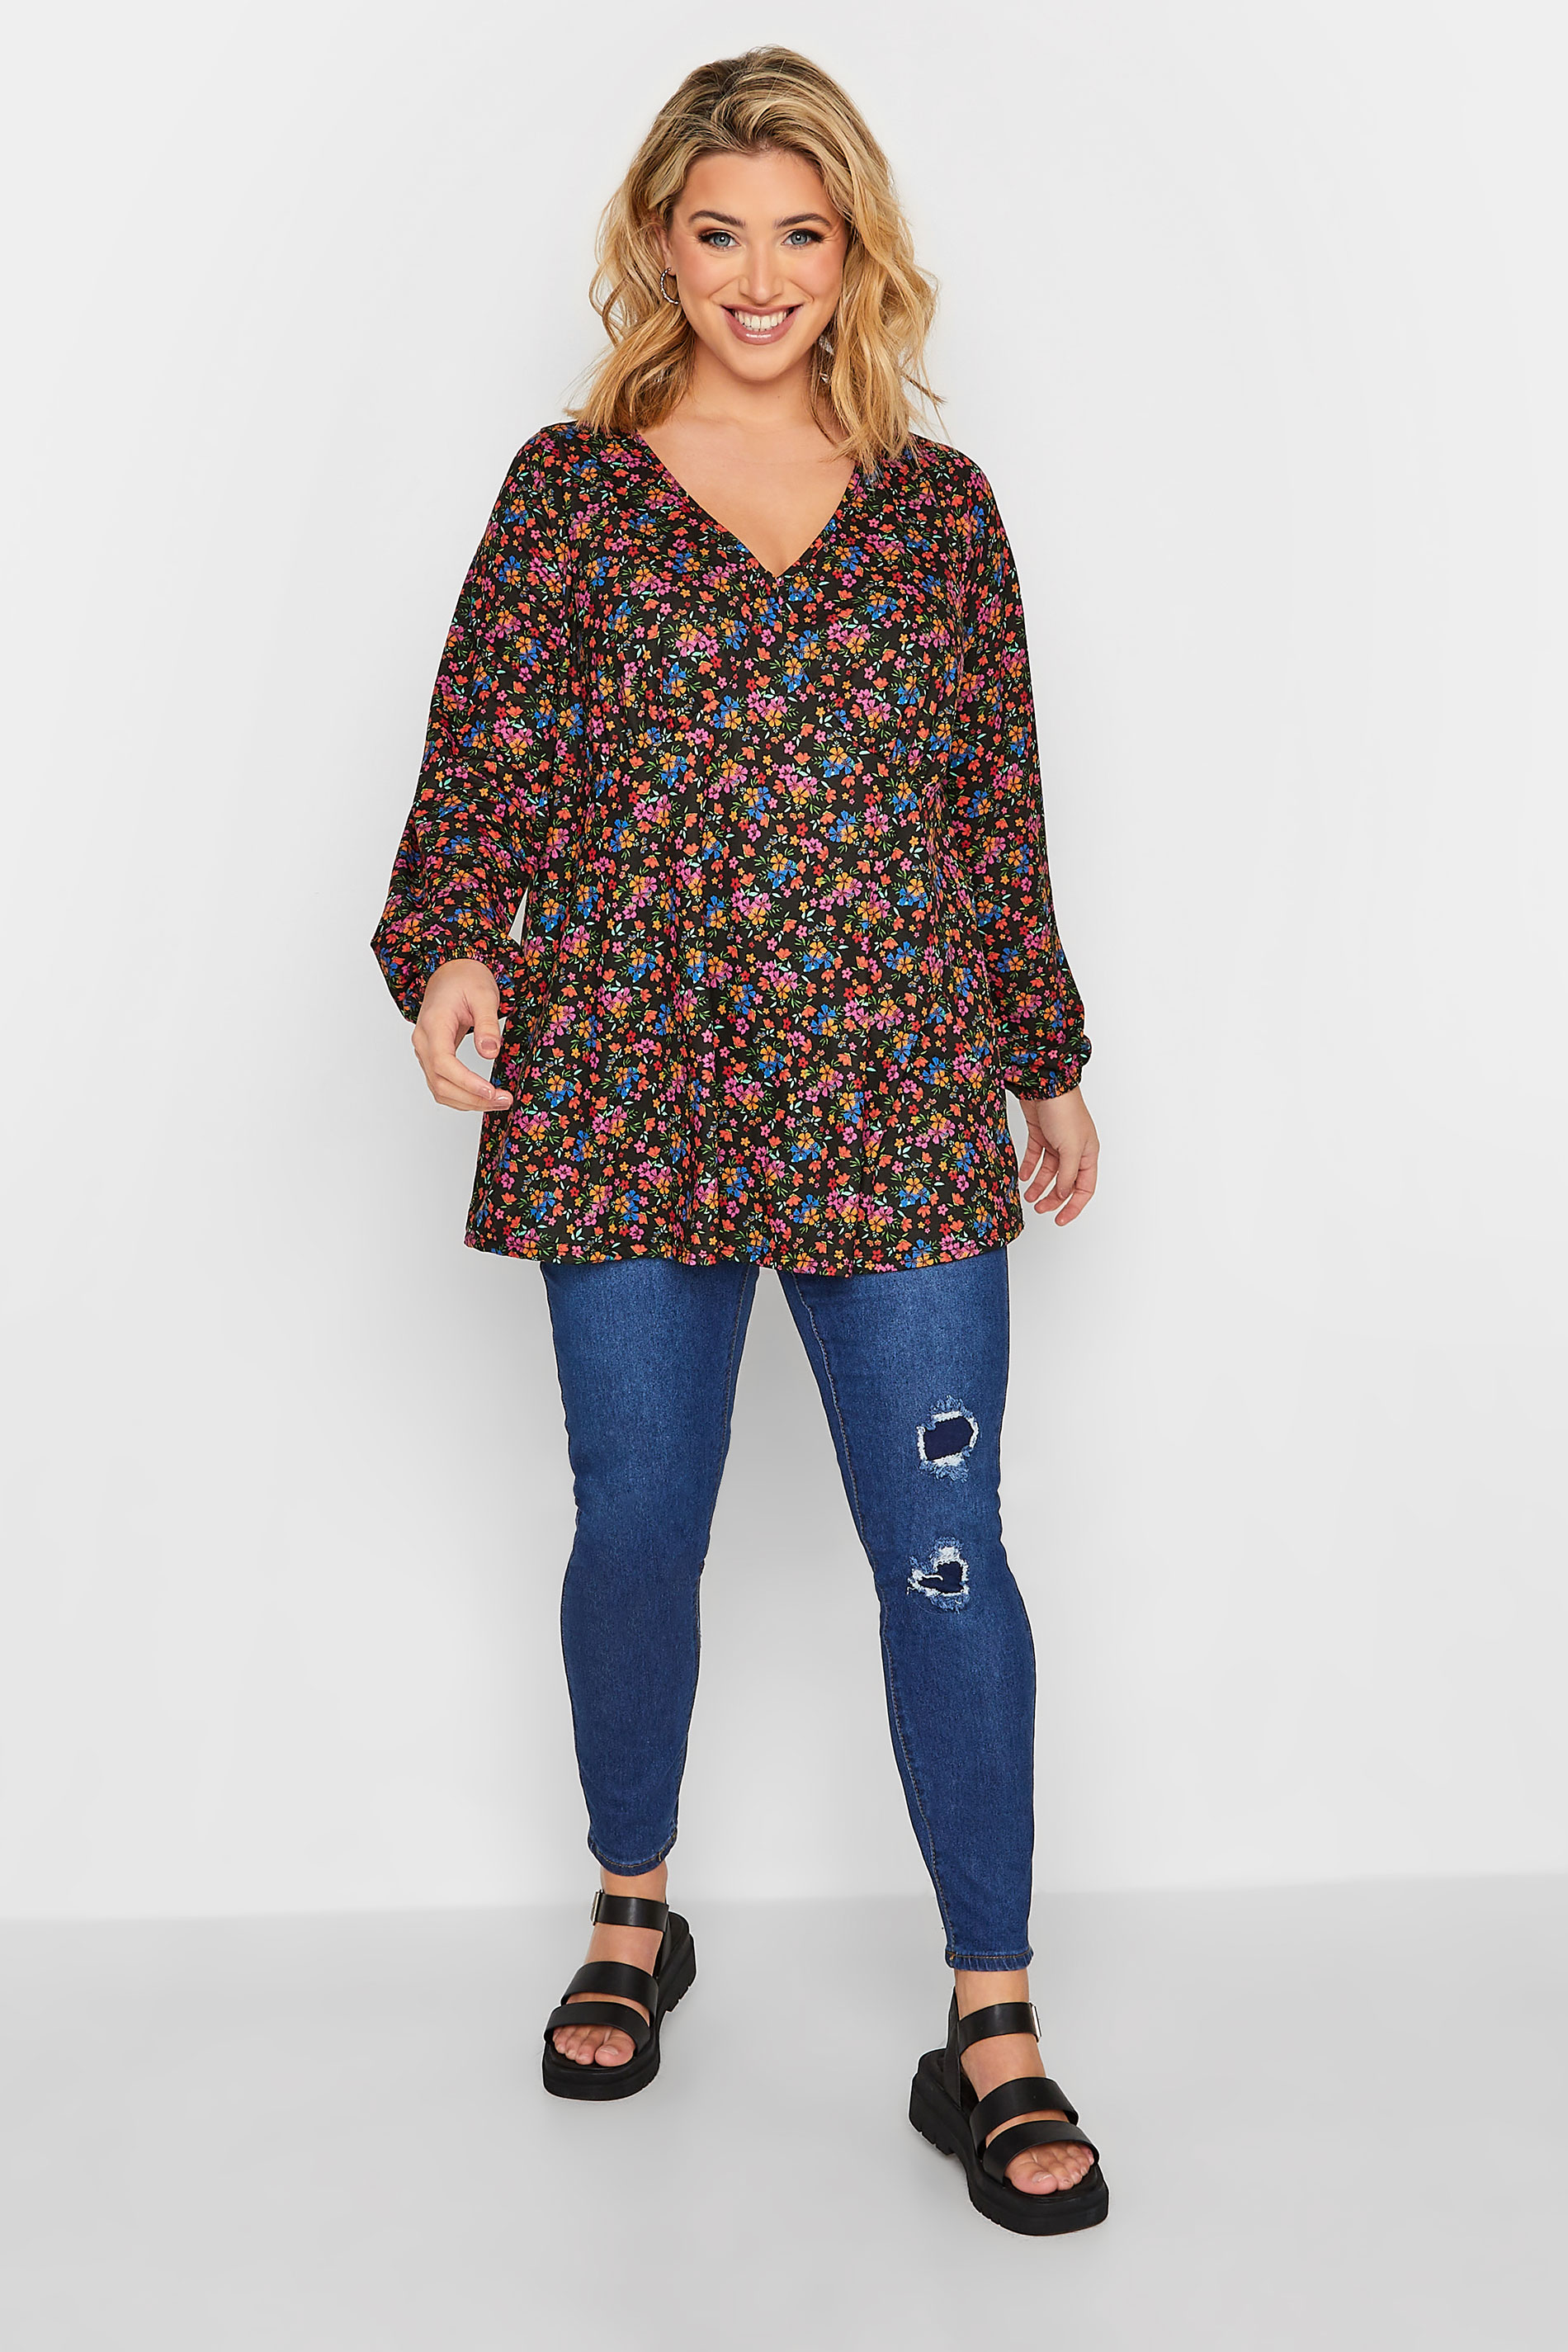 LIMITED COLLECTION Plus Size Black Floral Bust Detail Top | Yours Clothing 2